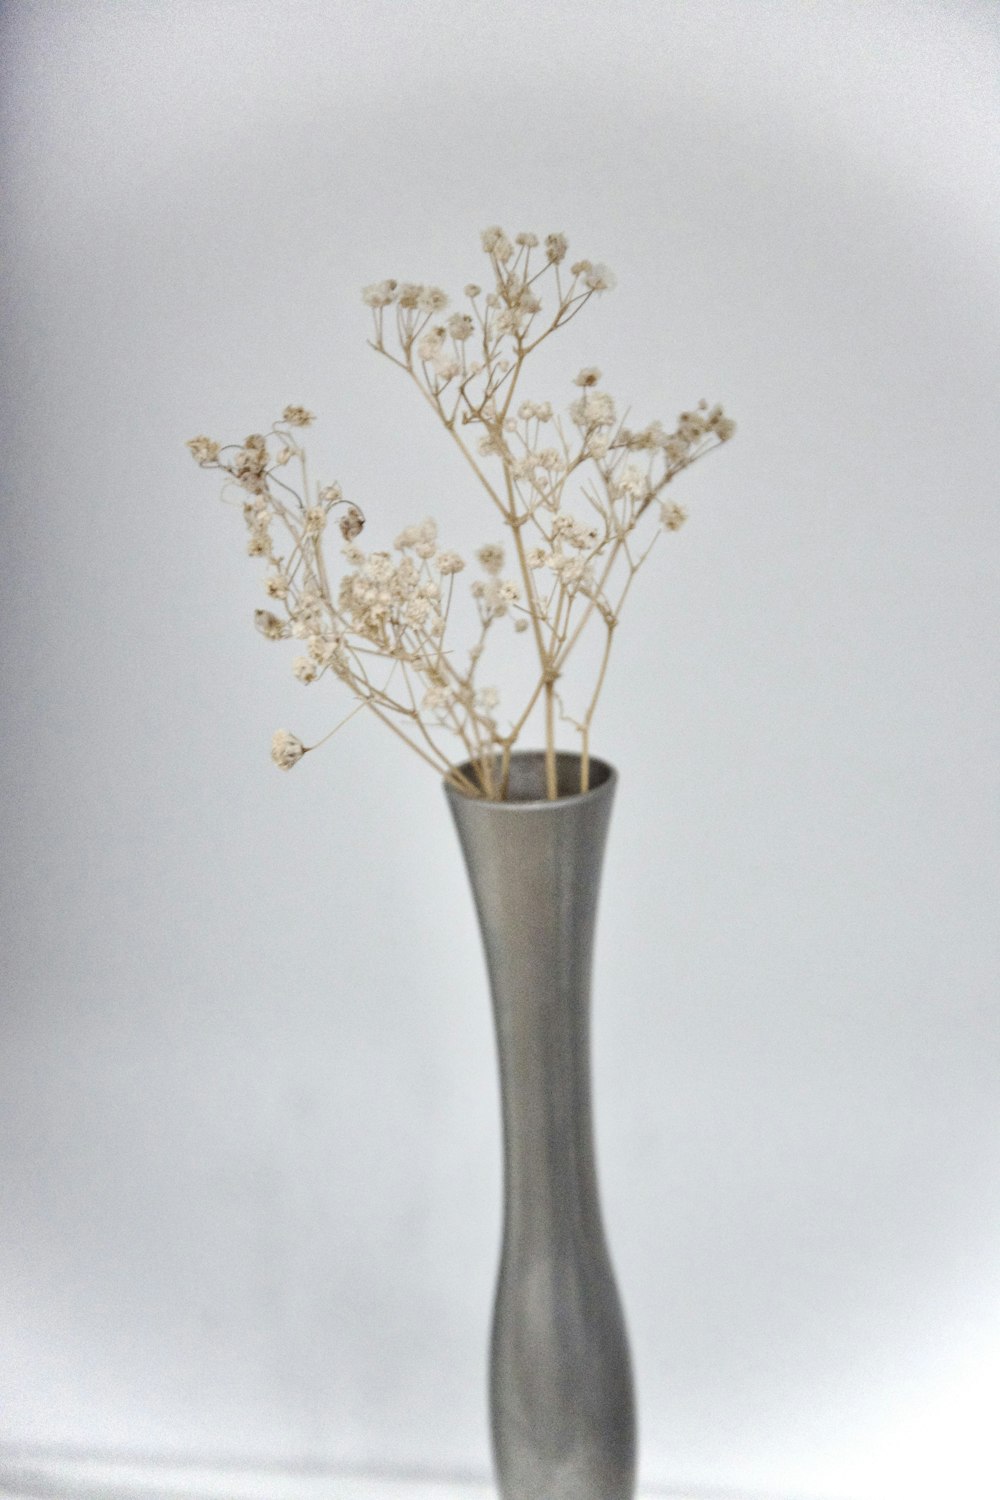 a vase with flowers